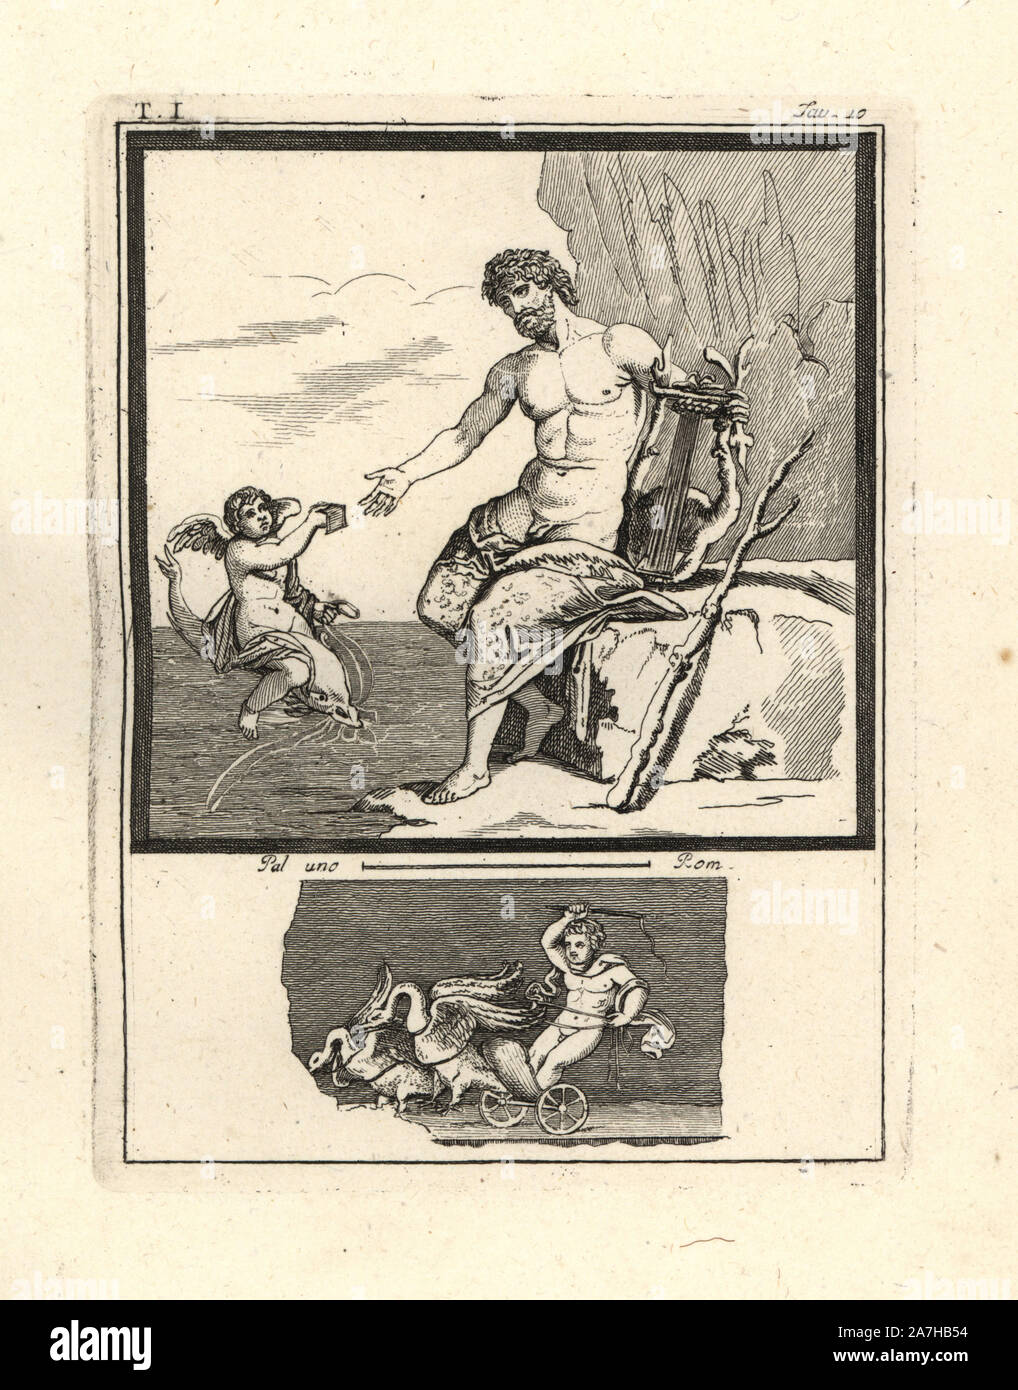 The Cyclops Polyphemus who fell in love with the nymph Galatea. He is shown with two eyes holding a lyre as he receives a message from Galatea brought by a Genius or cupid on a dolphin. The vignette below shows a cupid in a small carriage driven by swans. Copperplate engraved by Tommaso Piroli from his own 'Antichita di Ercolano' (Antiquities of Herculaneum), Rome, 1789.  Italian artist and engraver Piroli (1752-1824) published six volumes between 1789 and 1807 documenting the murals and bronzes found in Heraculaneum and Pompeii. Stock Photo